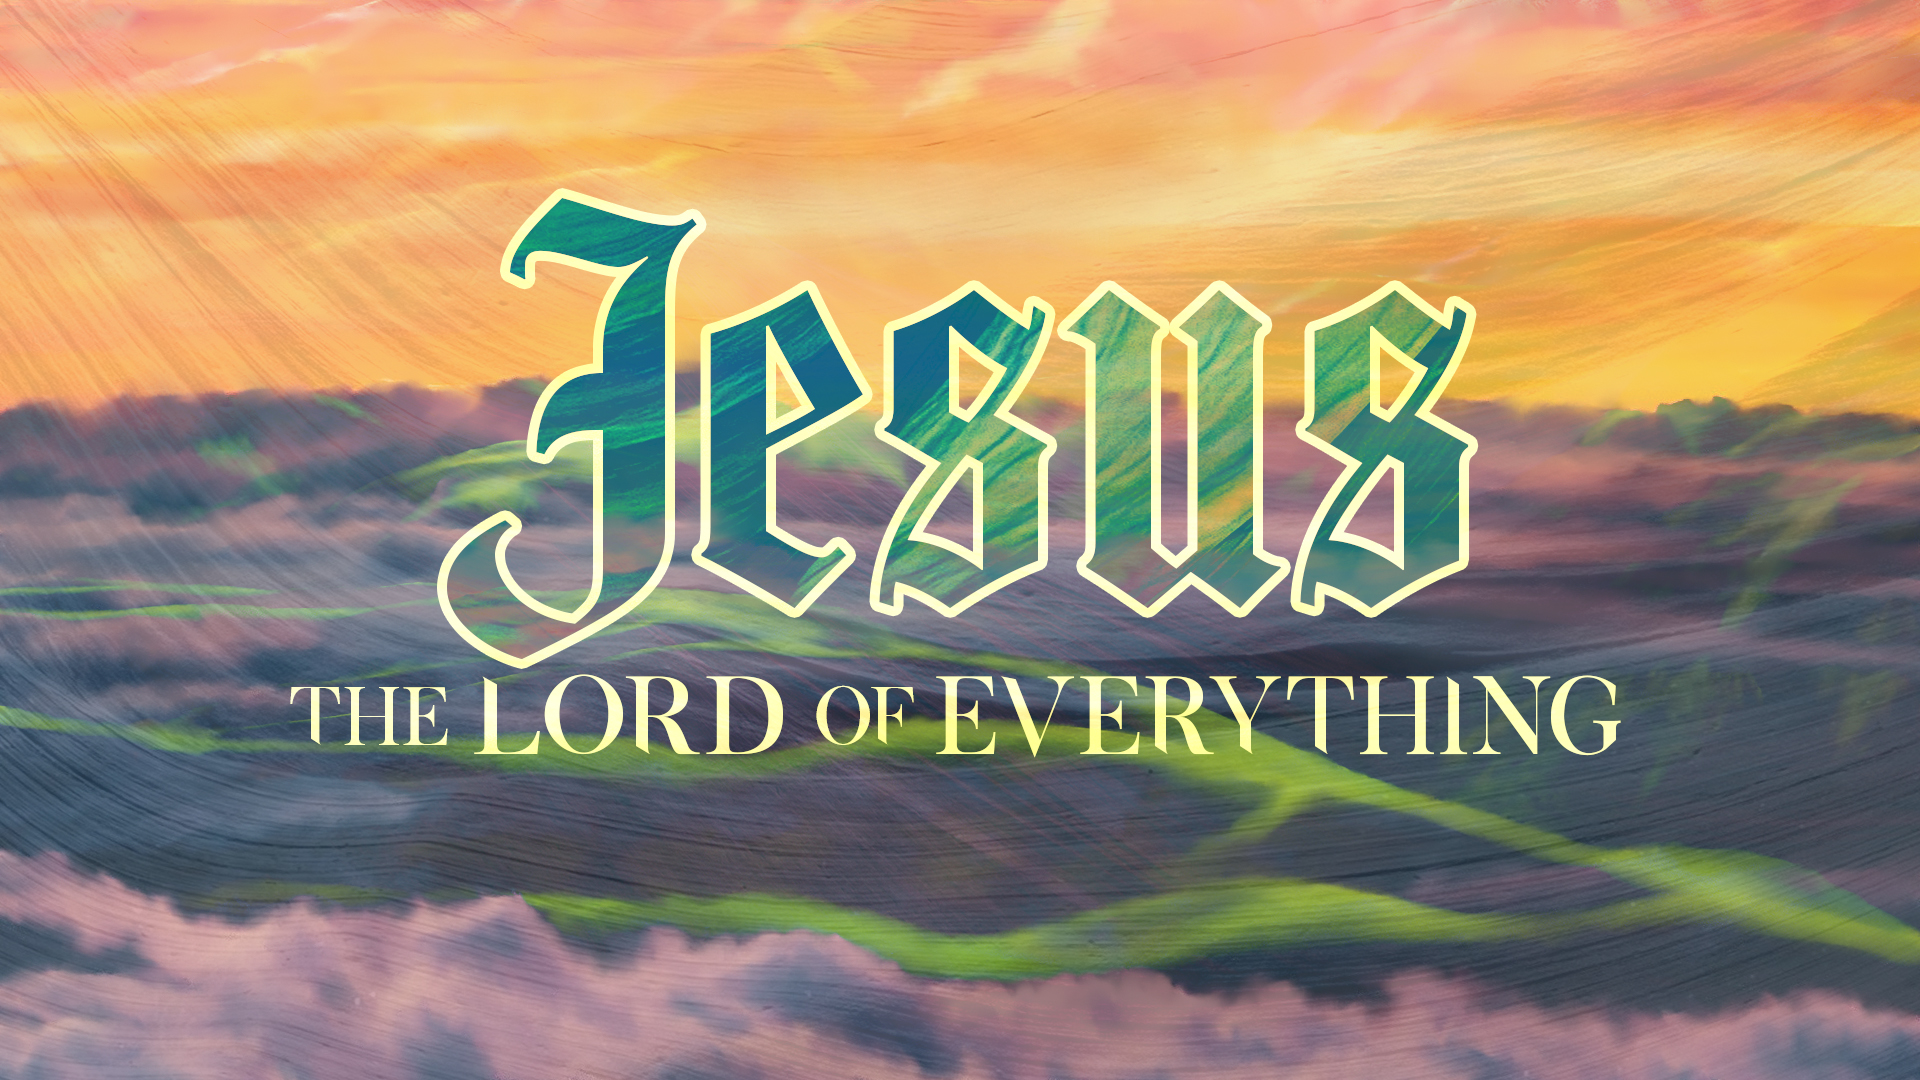 Jesus: The Lord of Everything